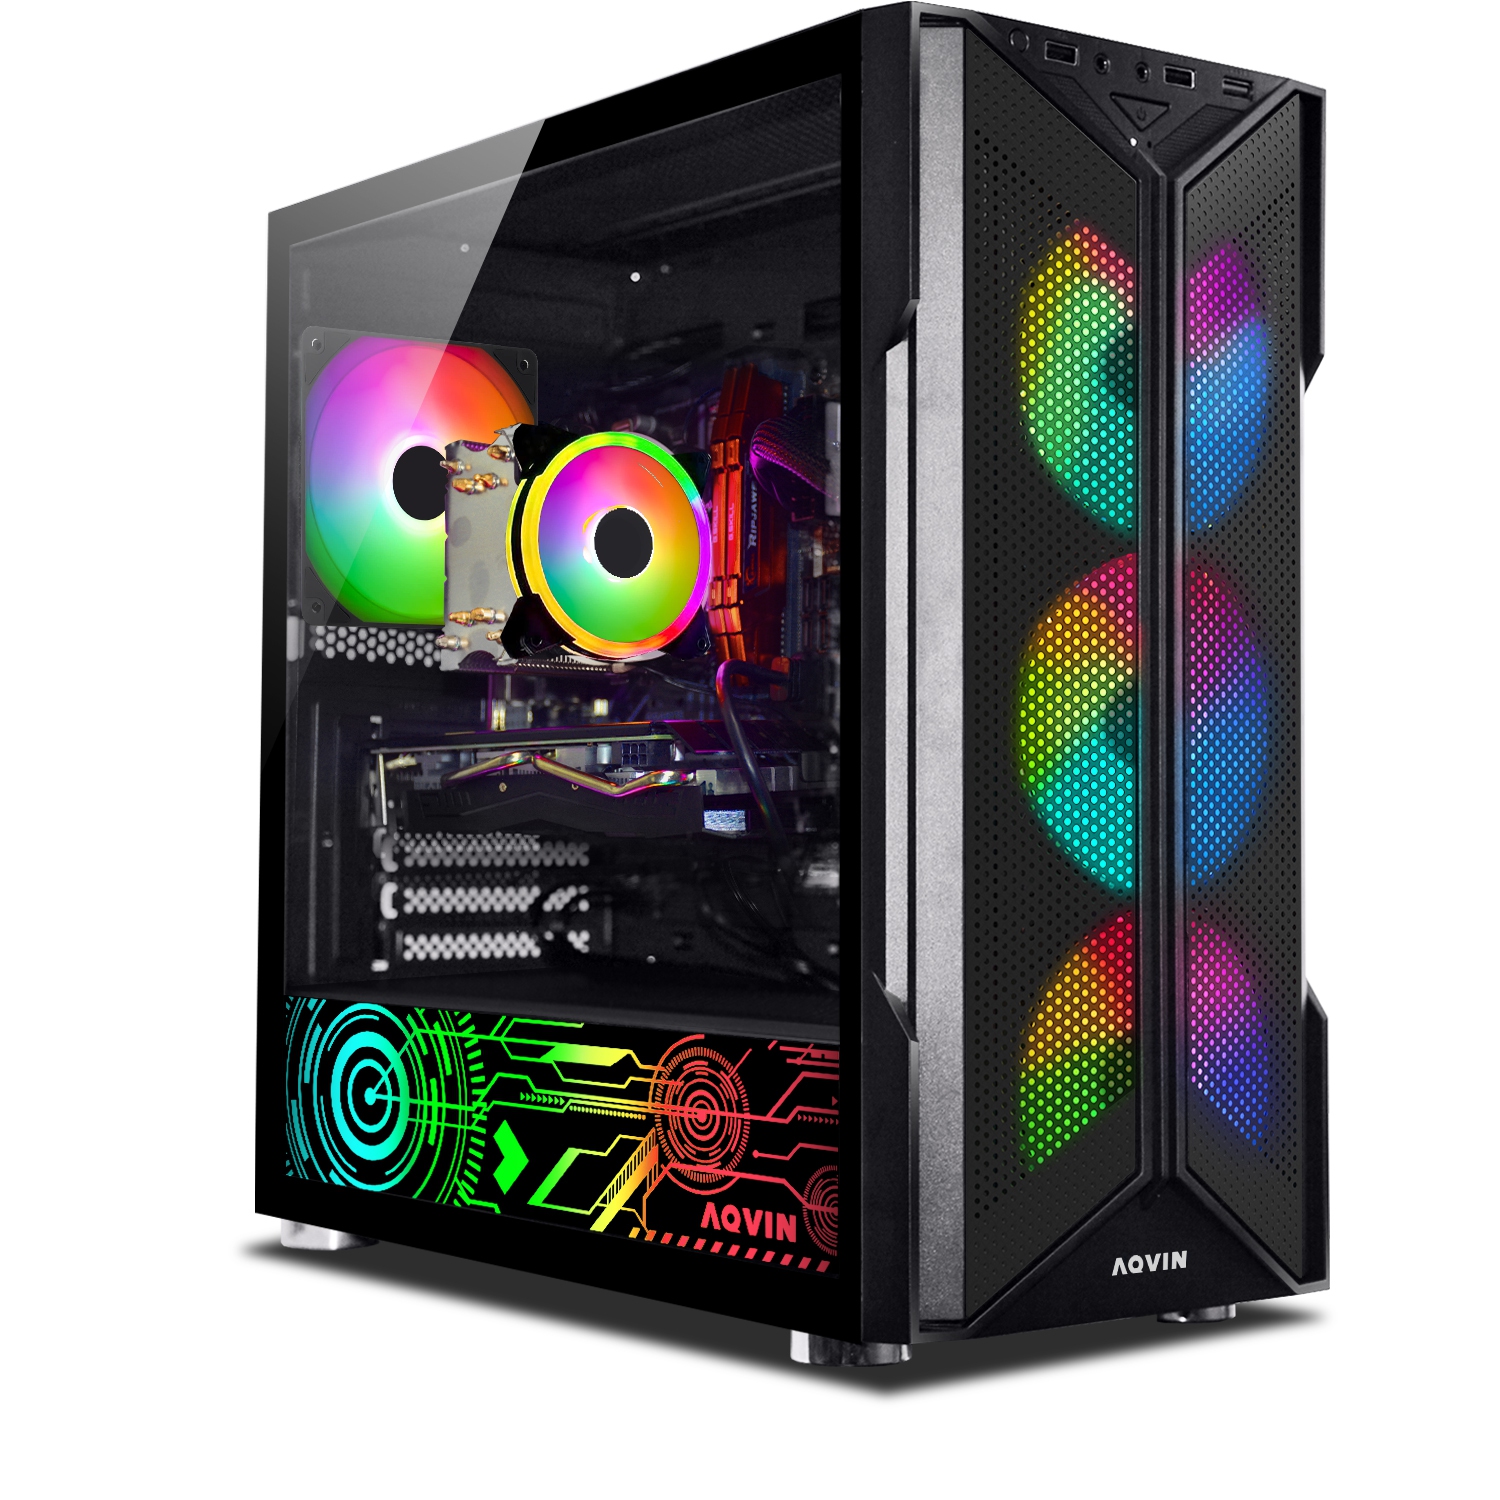 Gaming PC AQVIN-AQ20 Desktop Computer Tower - RGB (Intel Core i7 up to 4.60 GHz/ 1TB SSD/ 32GB DDR4 RAM/ GeForce RTX 4060 8GB/ windows 11) - Only at Best Buy